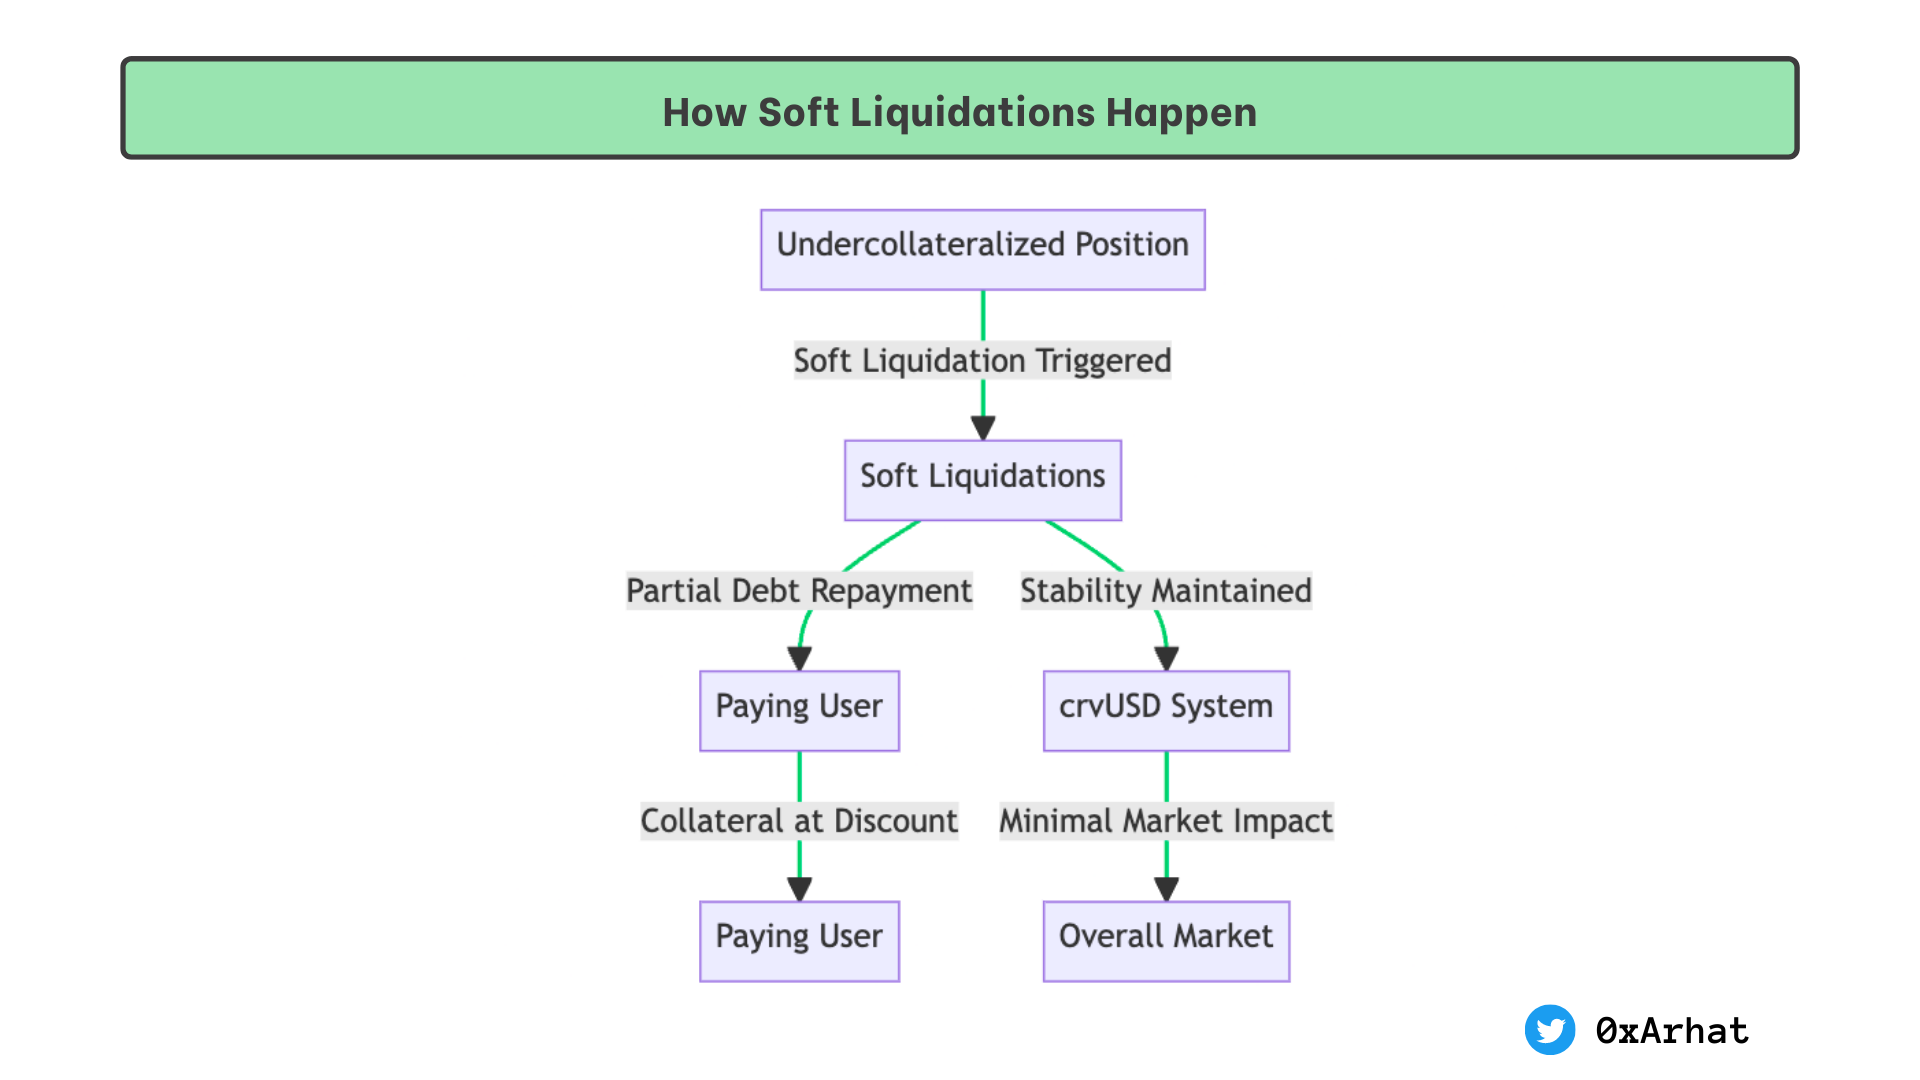 The diagram illustrates the soft liquidation process in the crvUSD stablecoin system.